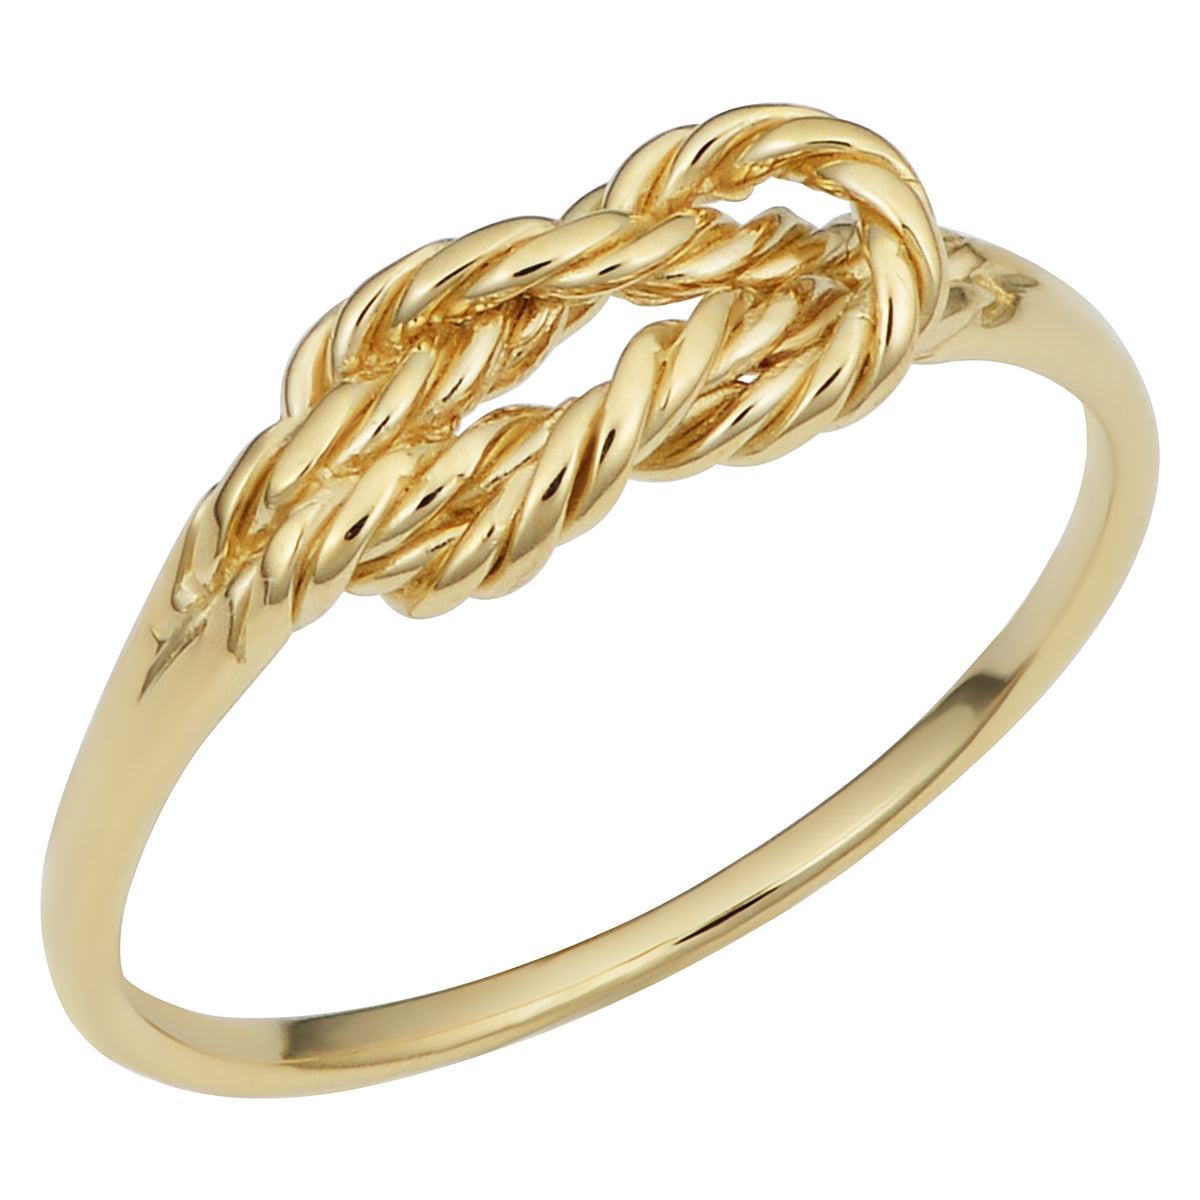 14k Yellow Gold Twisted Love Knot Ring